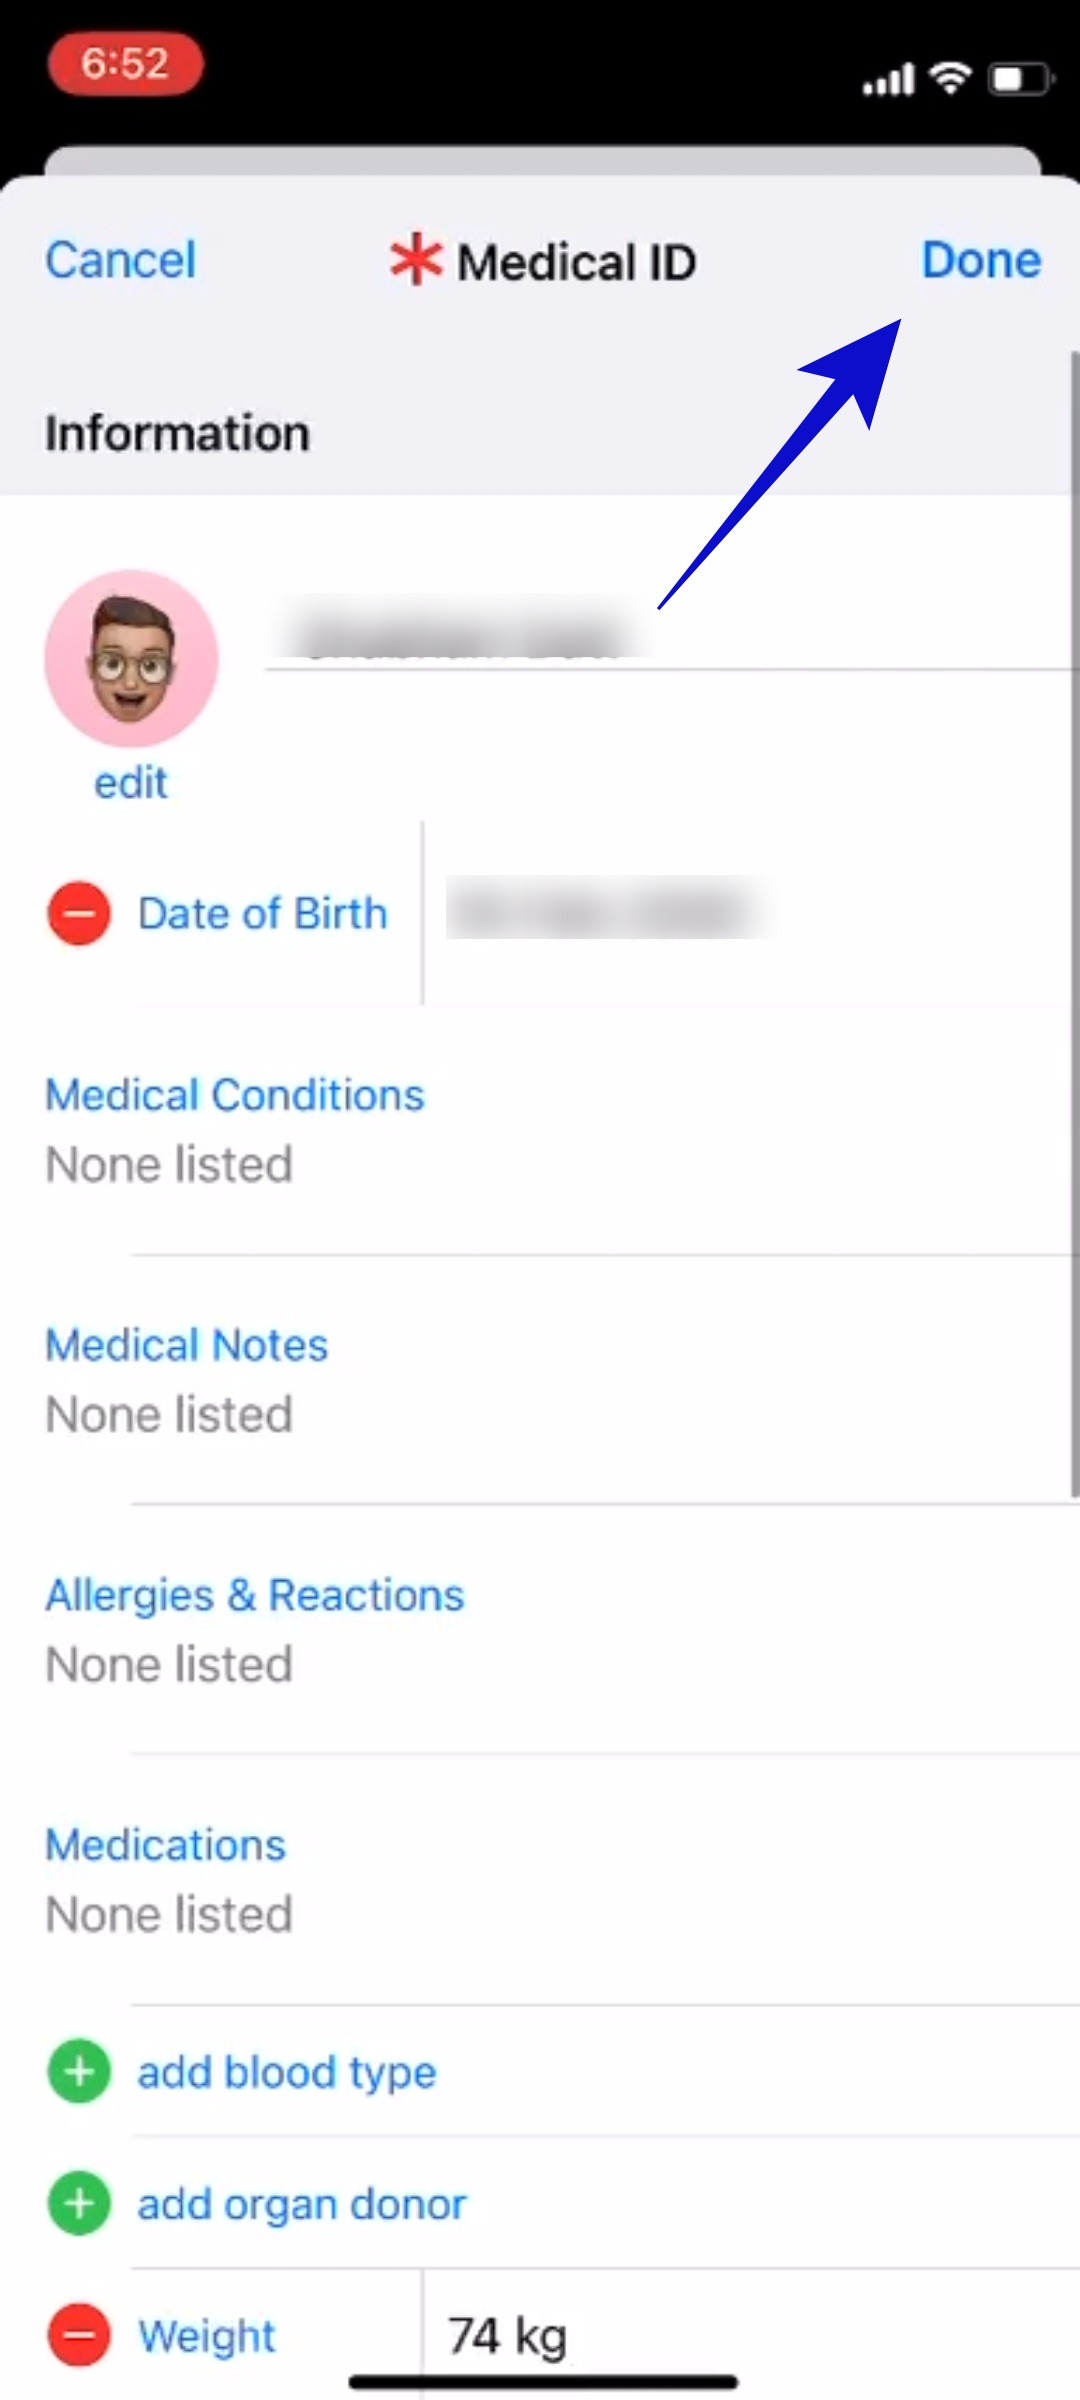 tap done once you add required medical information